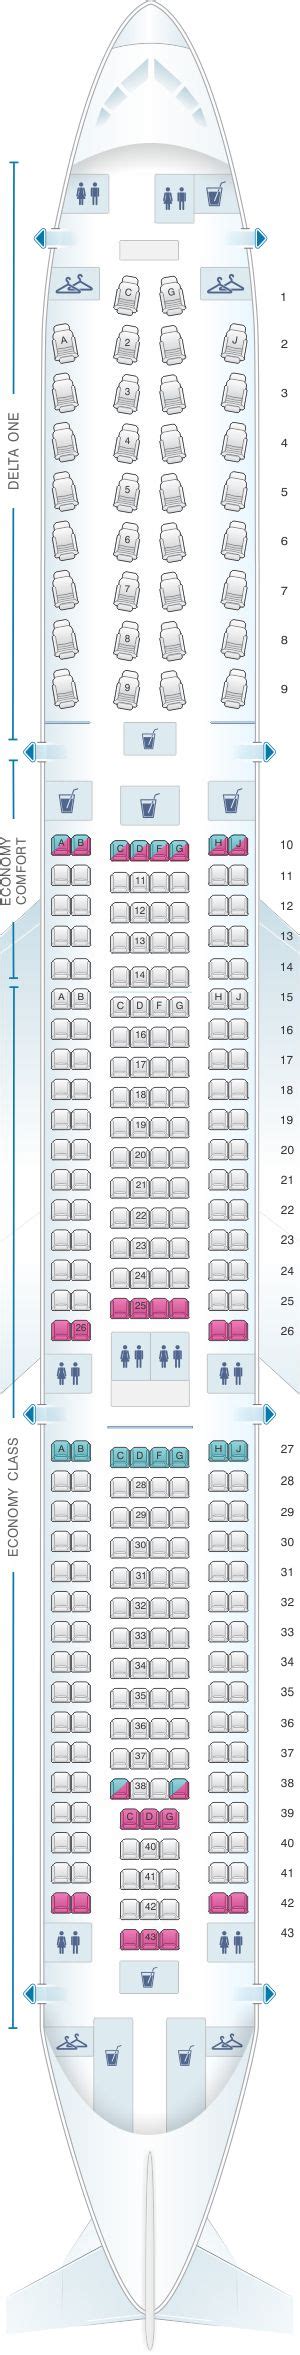 Seat Map Airbus A330 300 333 Air France Boeing Delta Airlines